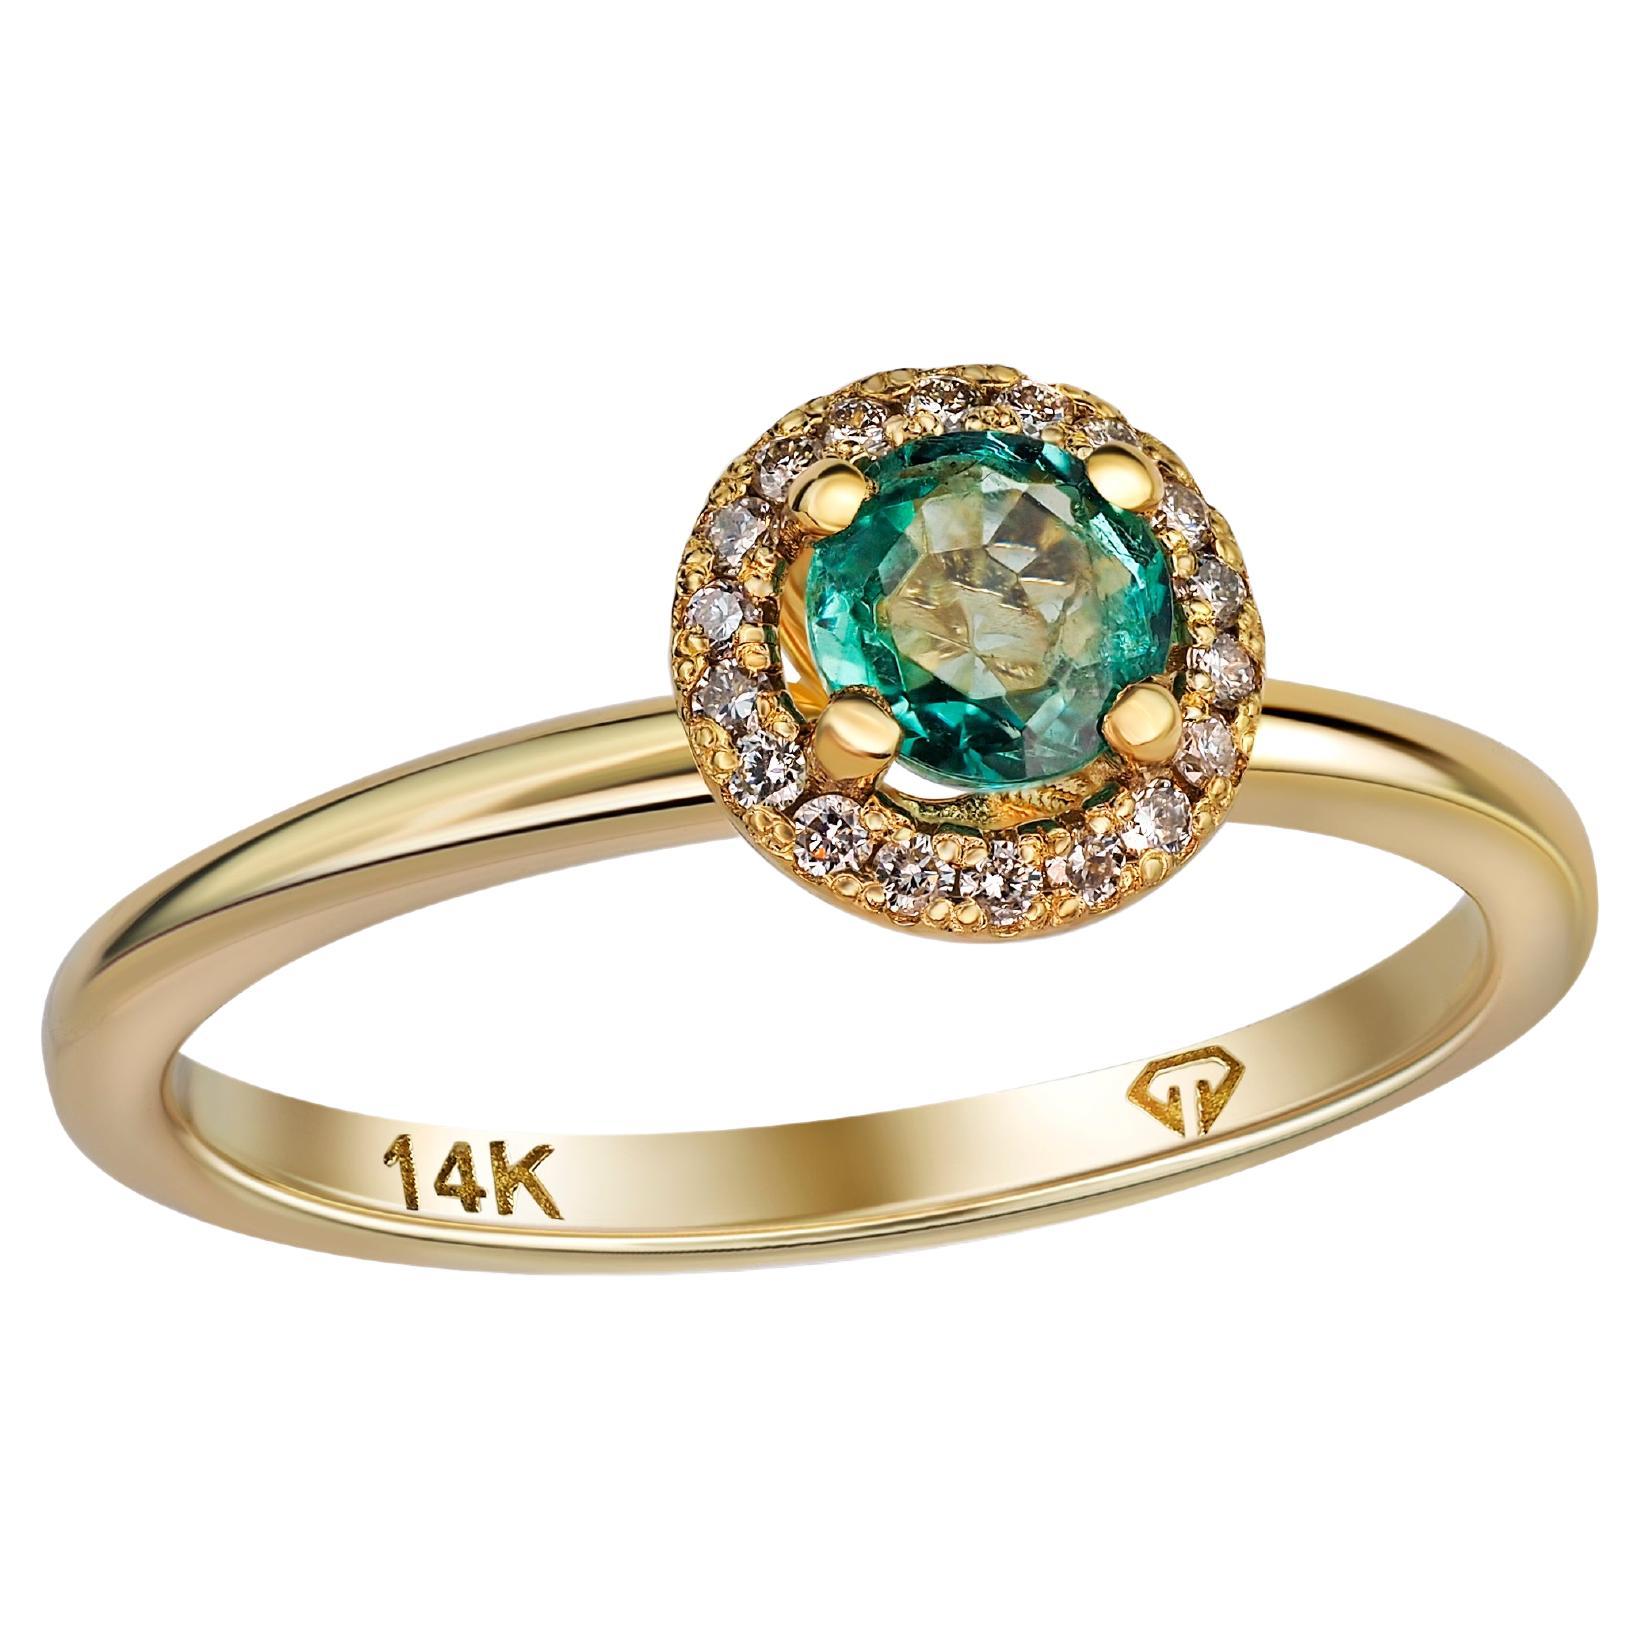 Emerald ring. Emerald engagement ring. Emerald gold ring. Halo emerald ring with diamonds. Dainty Emerald ring. Real emerald ring.
Metal type: Gold, yellow gold
Metal stamp: 14k Gold
Size: US -7.5
Weight: 2 gr
Central gemstone
Emerald: round shape,